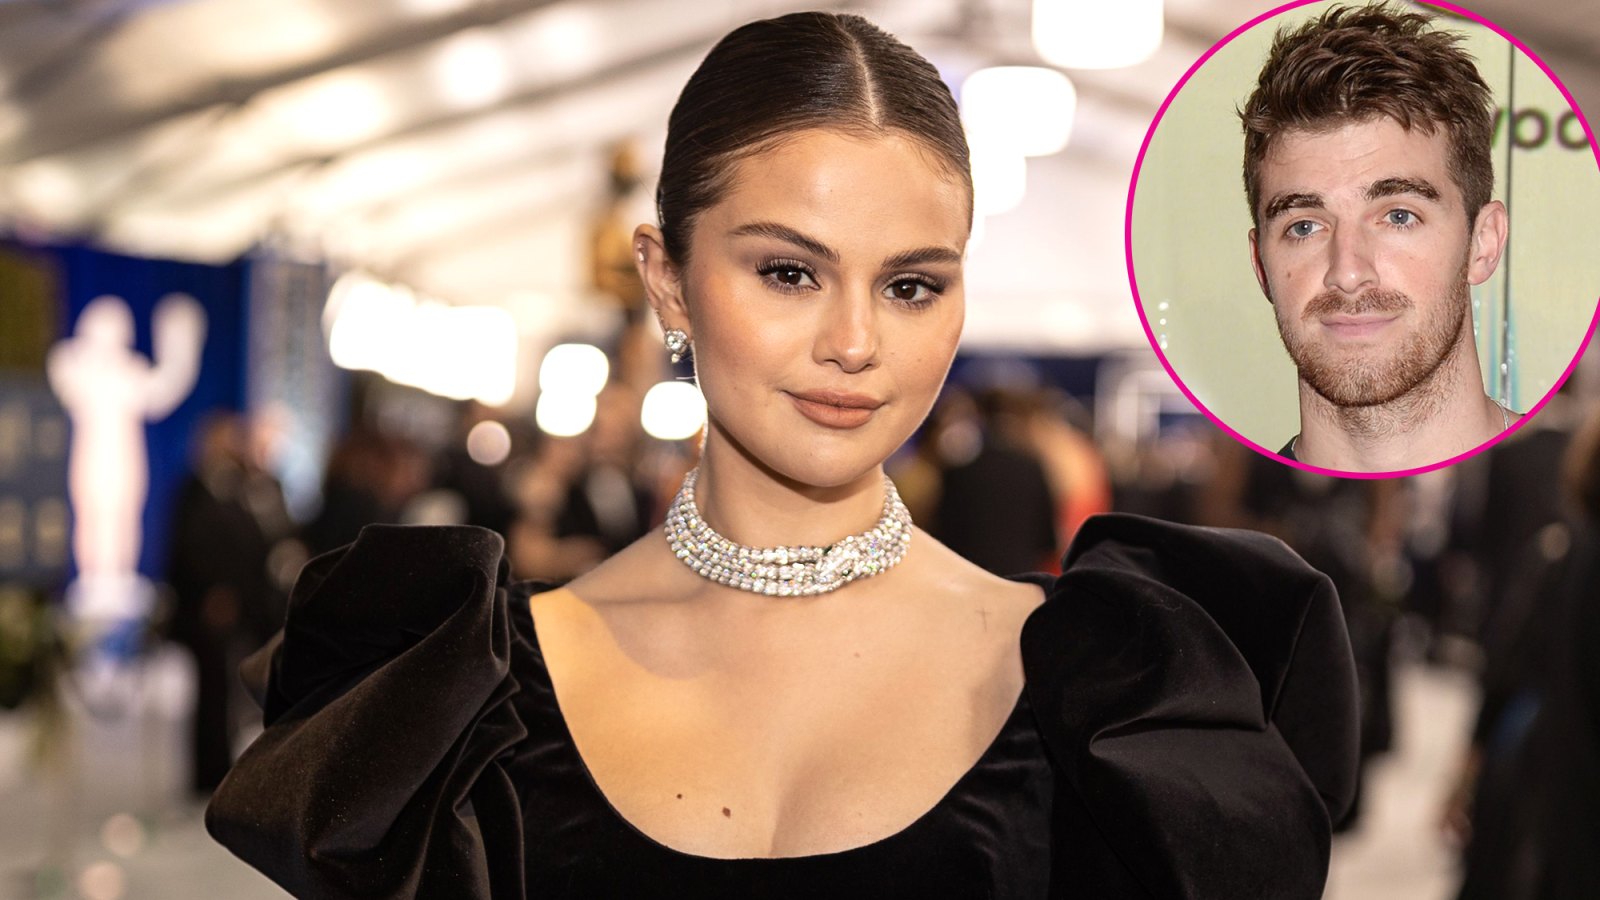 Selena Gomez Offers Update on Her Dating Life After Drew Taggart Romance: 'Still Out Here Lookin'